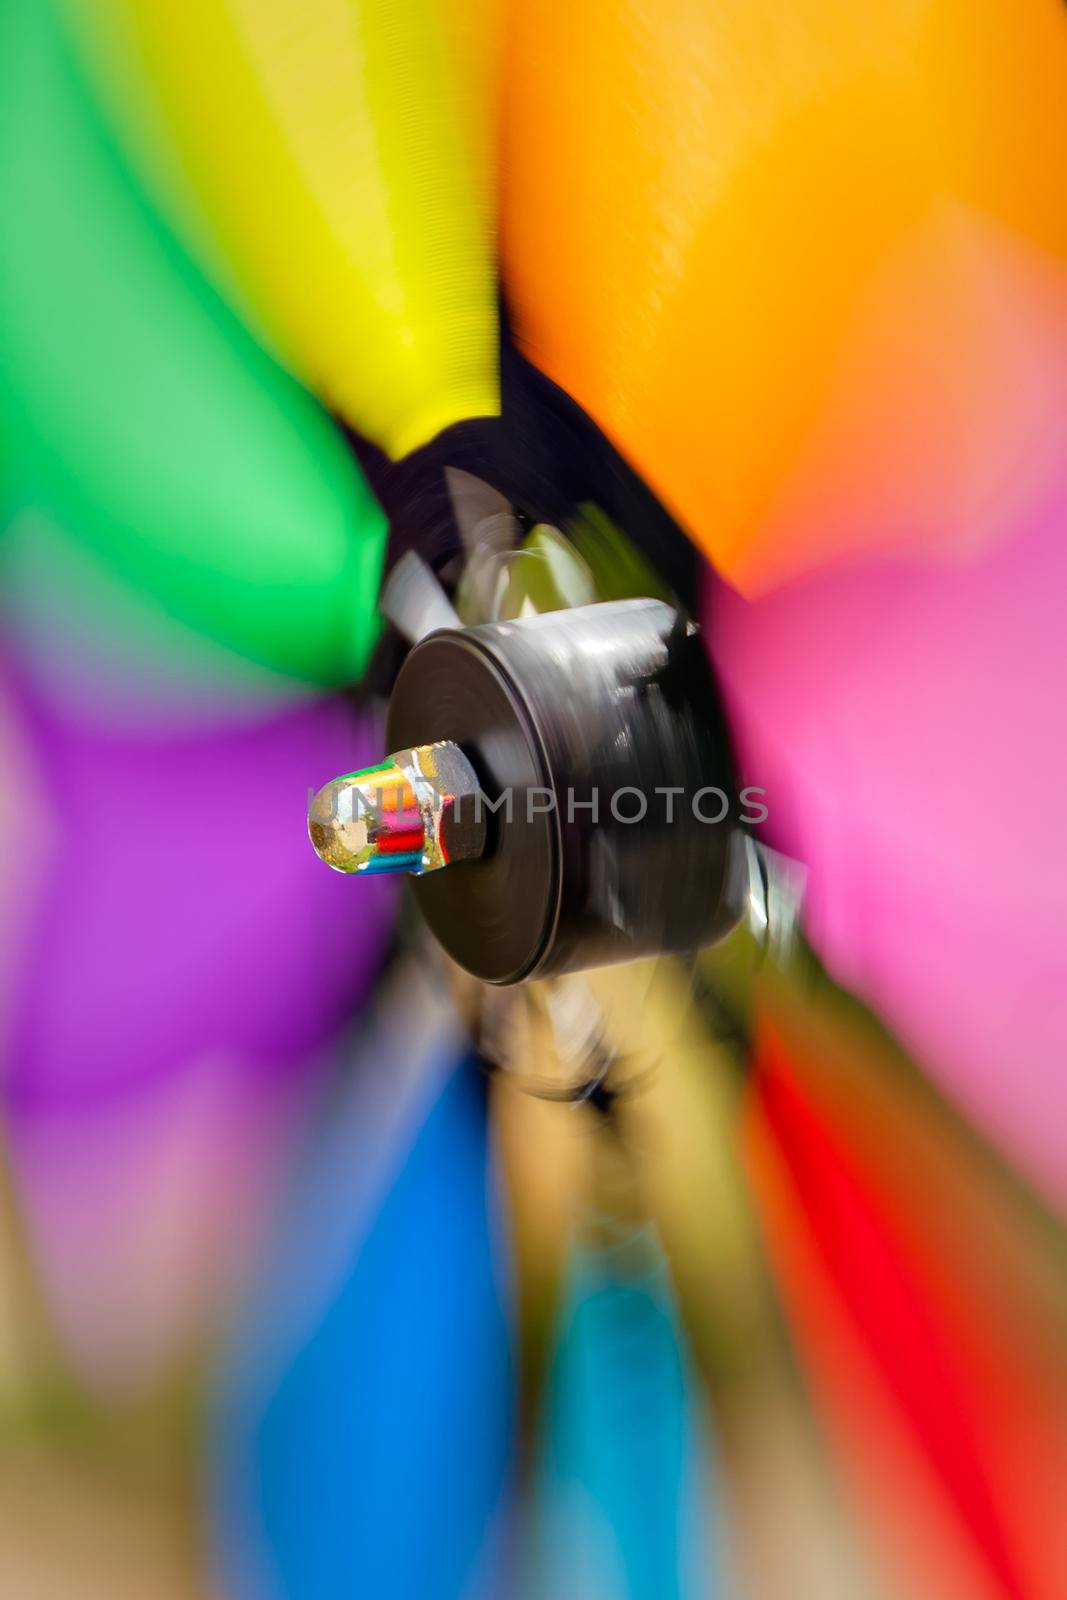 Colorful pinwheel spinning rapidly in the garden.